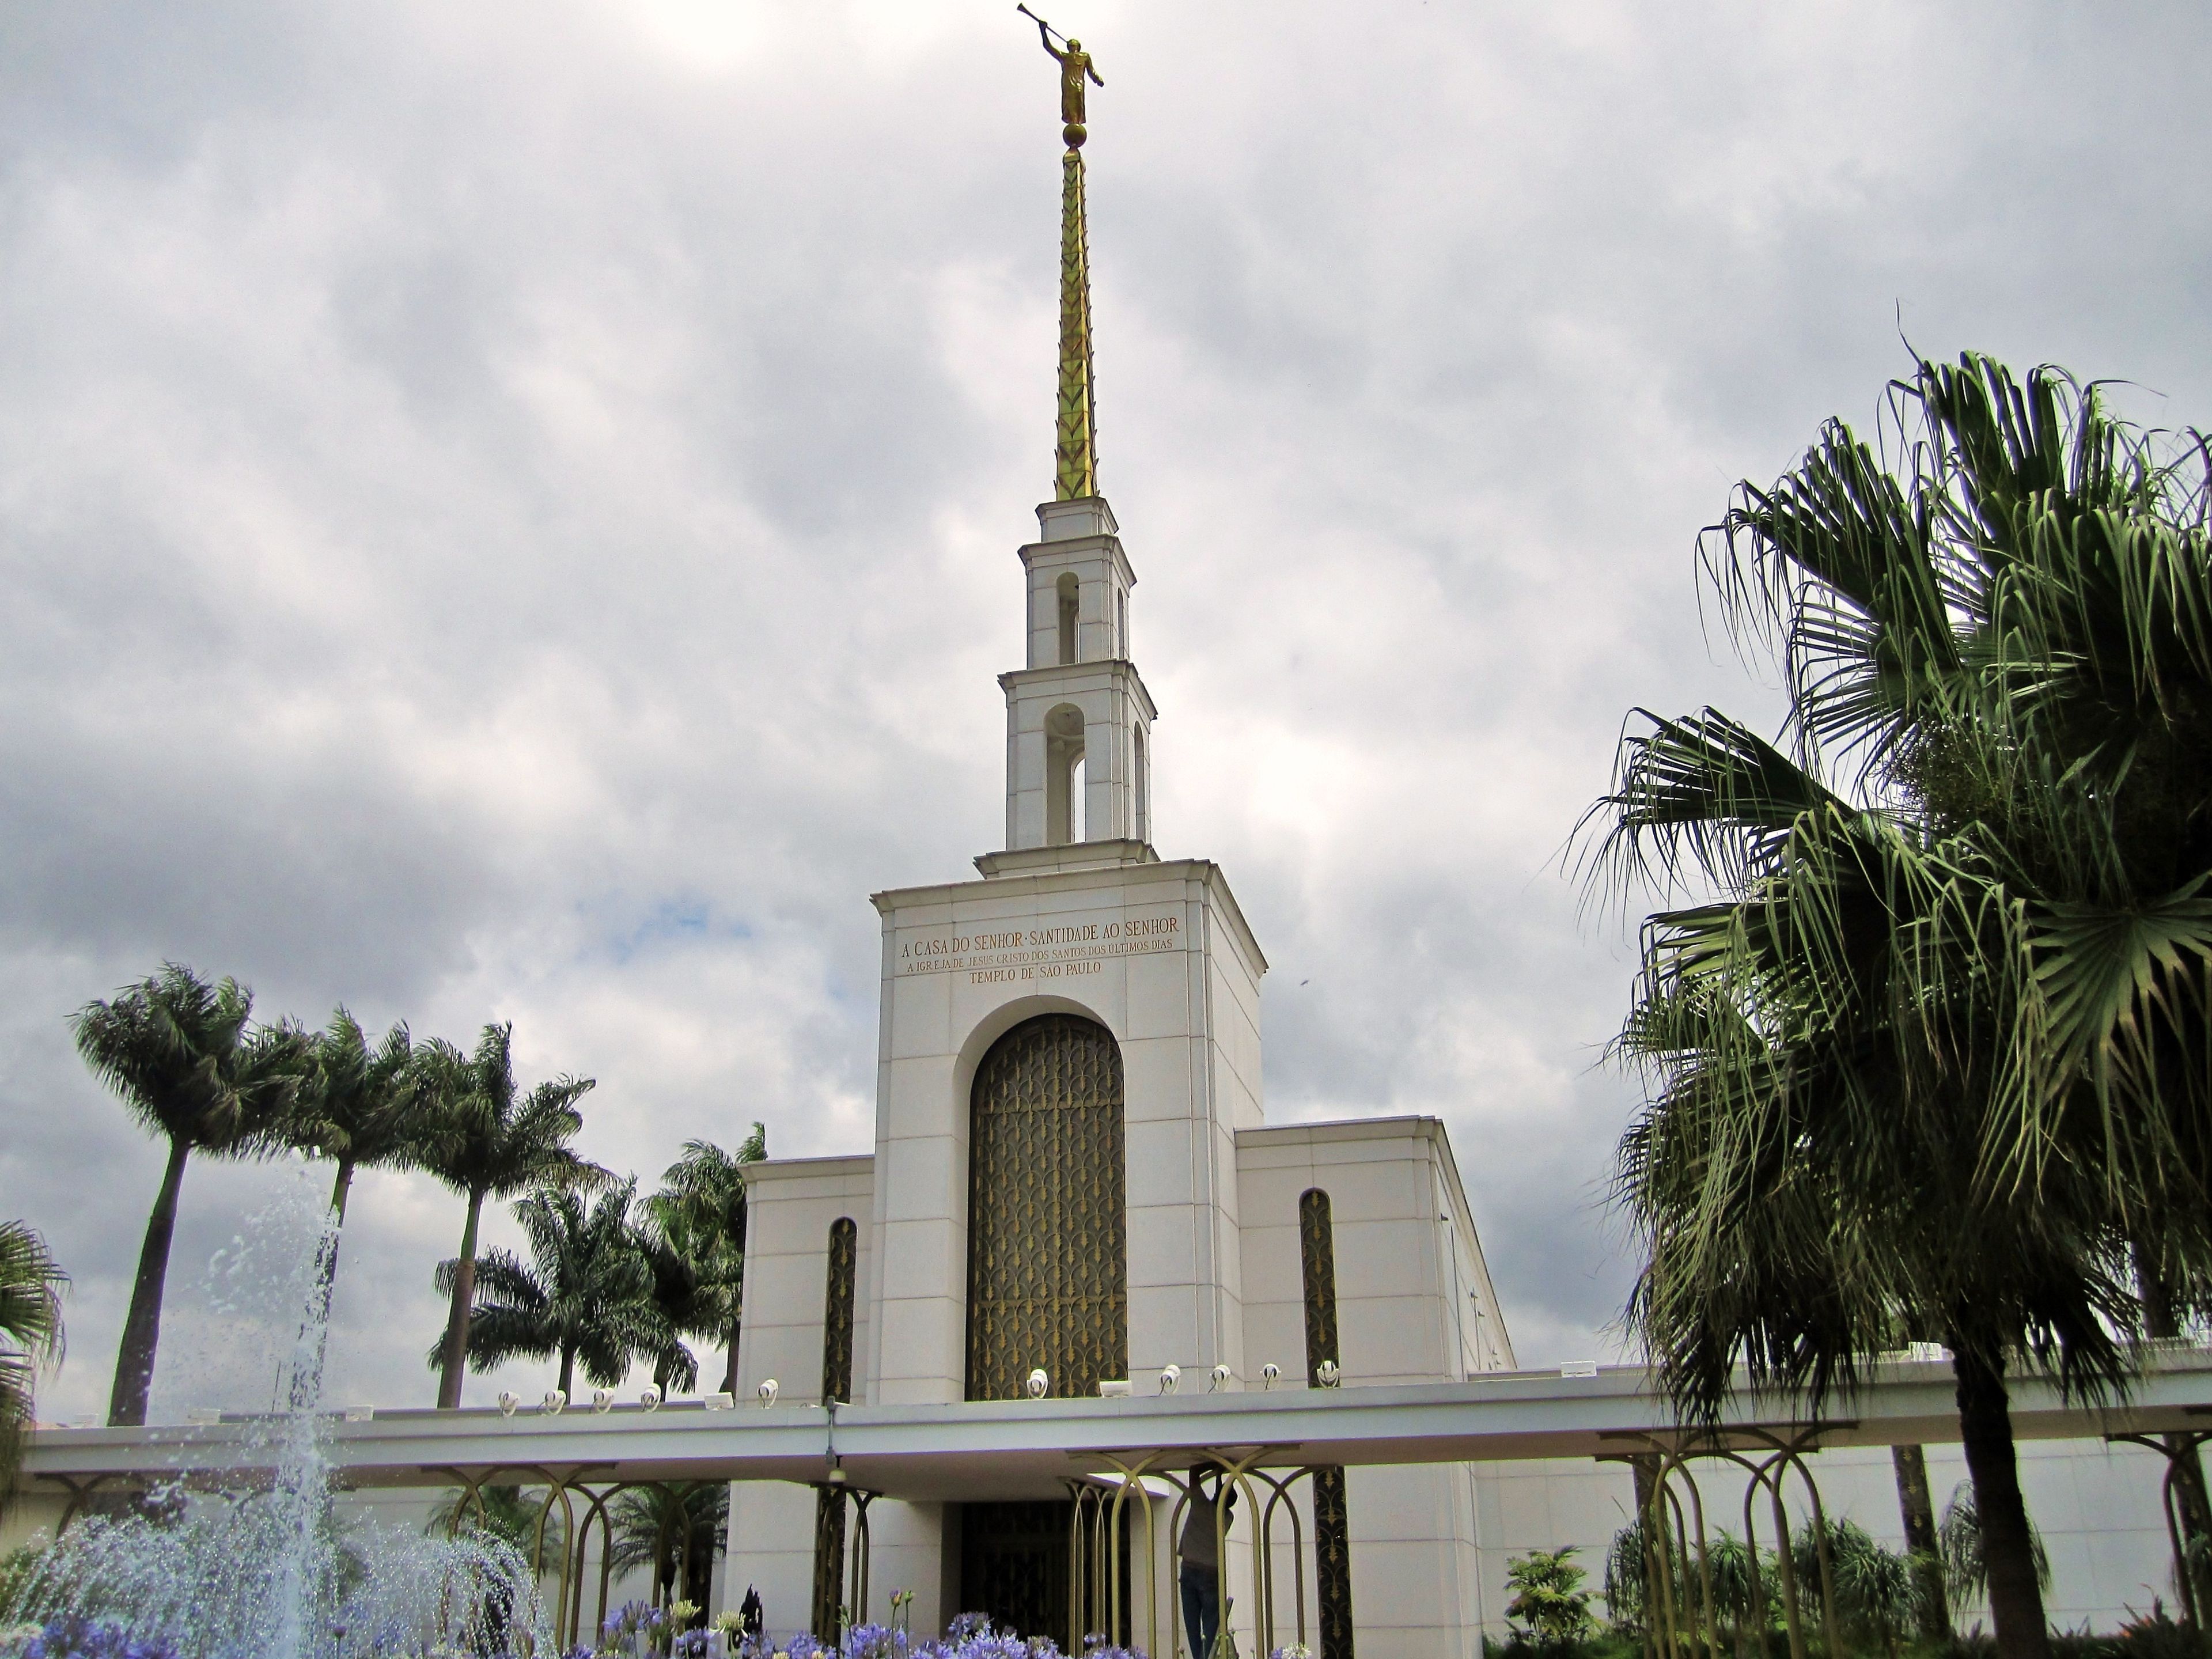 The São Paulo Brazil Temple entrance, including the fountain and spire.